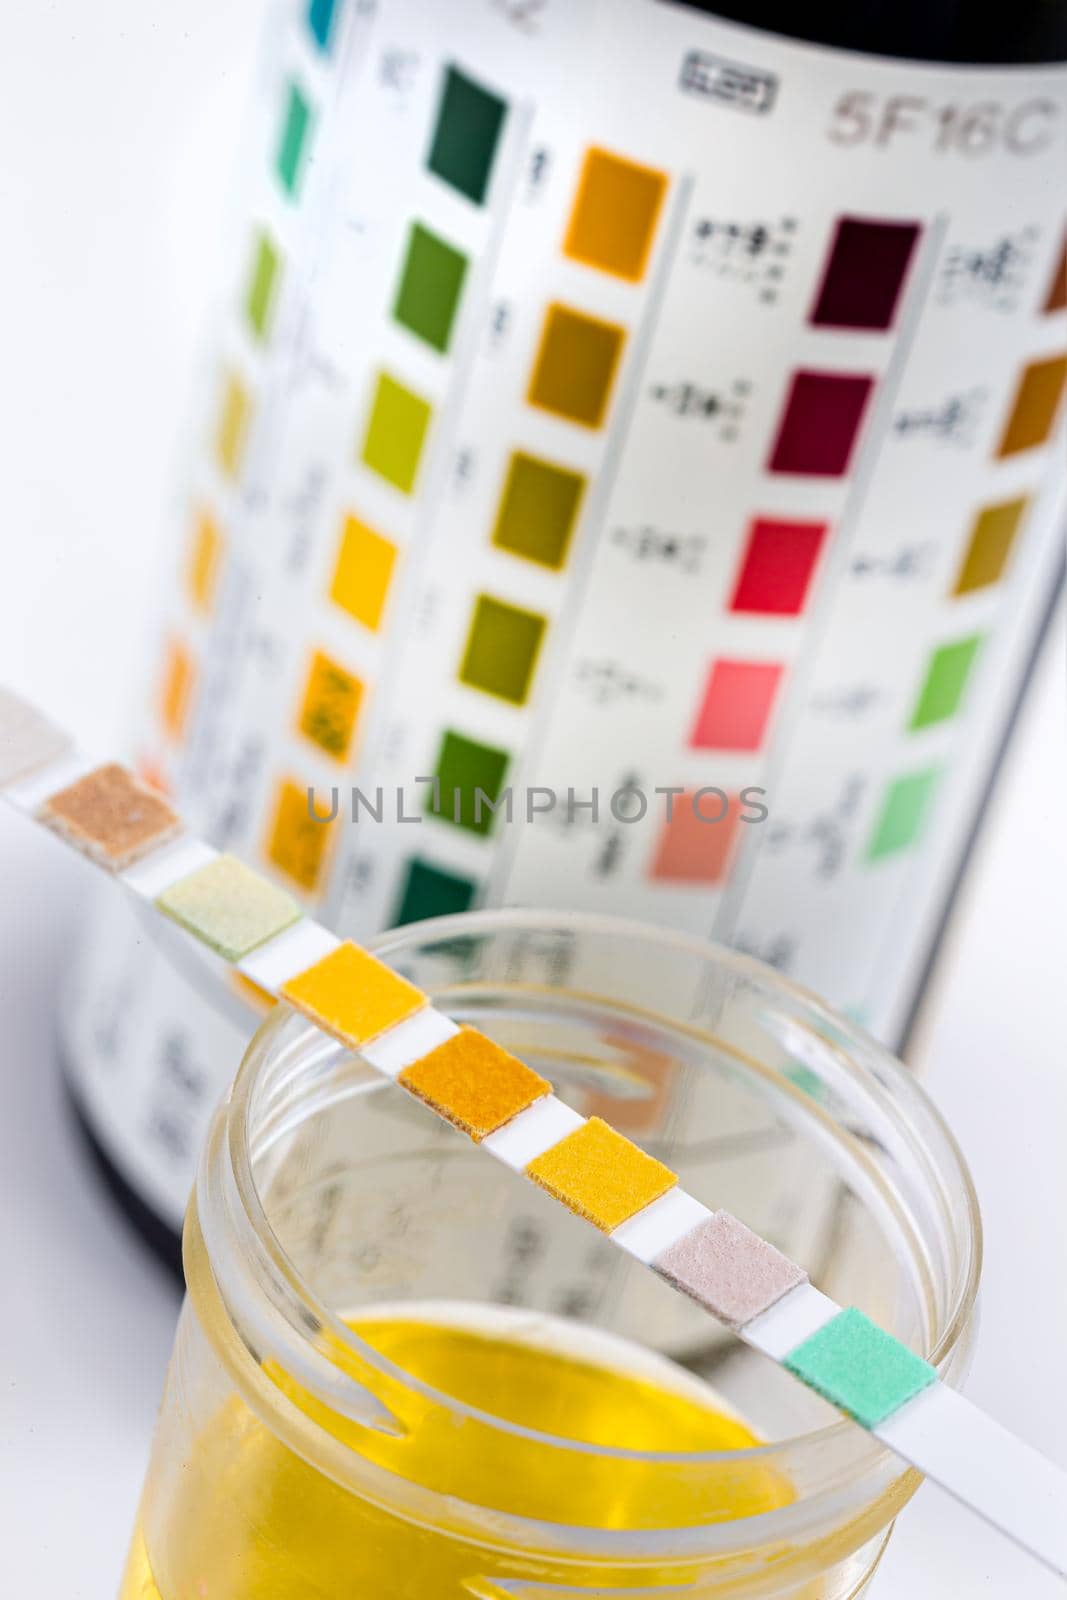 strip placed on the vials of urine close up view